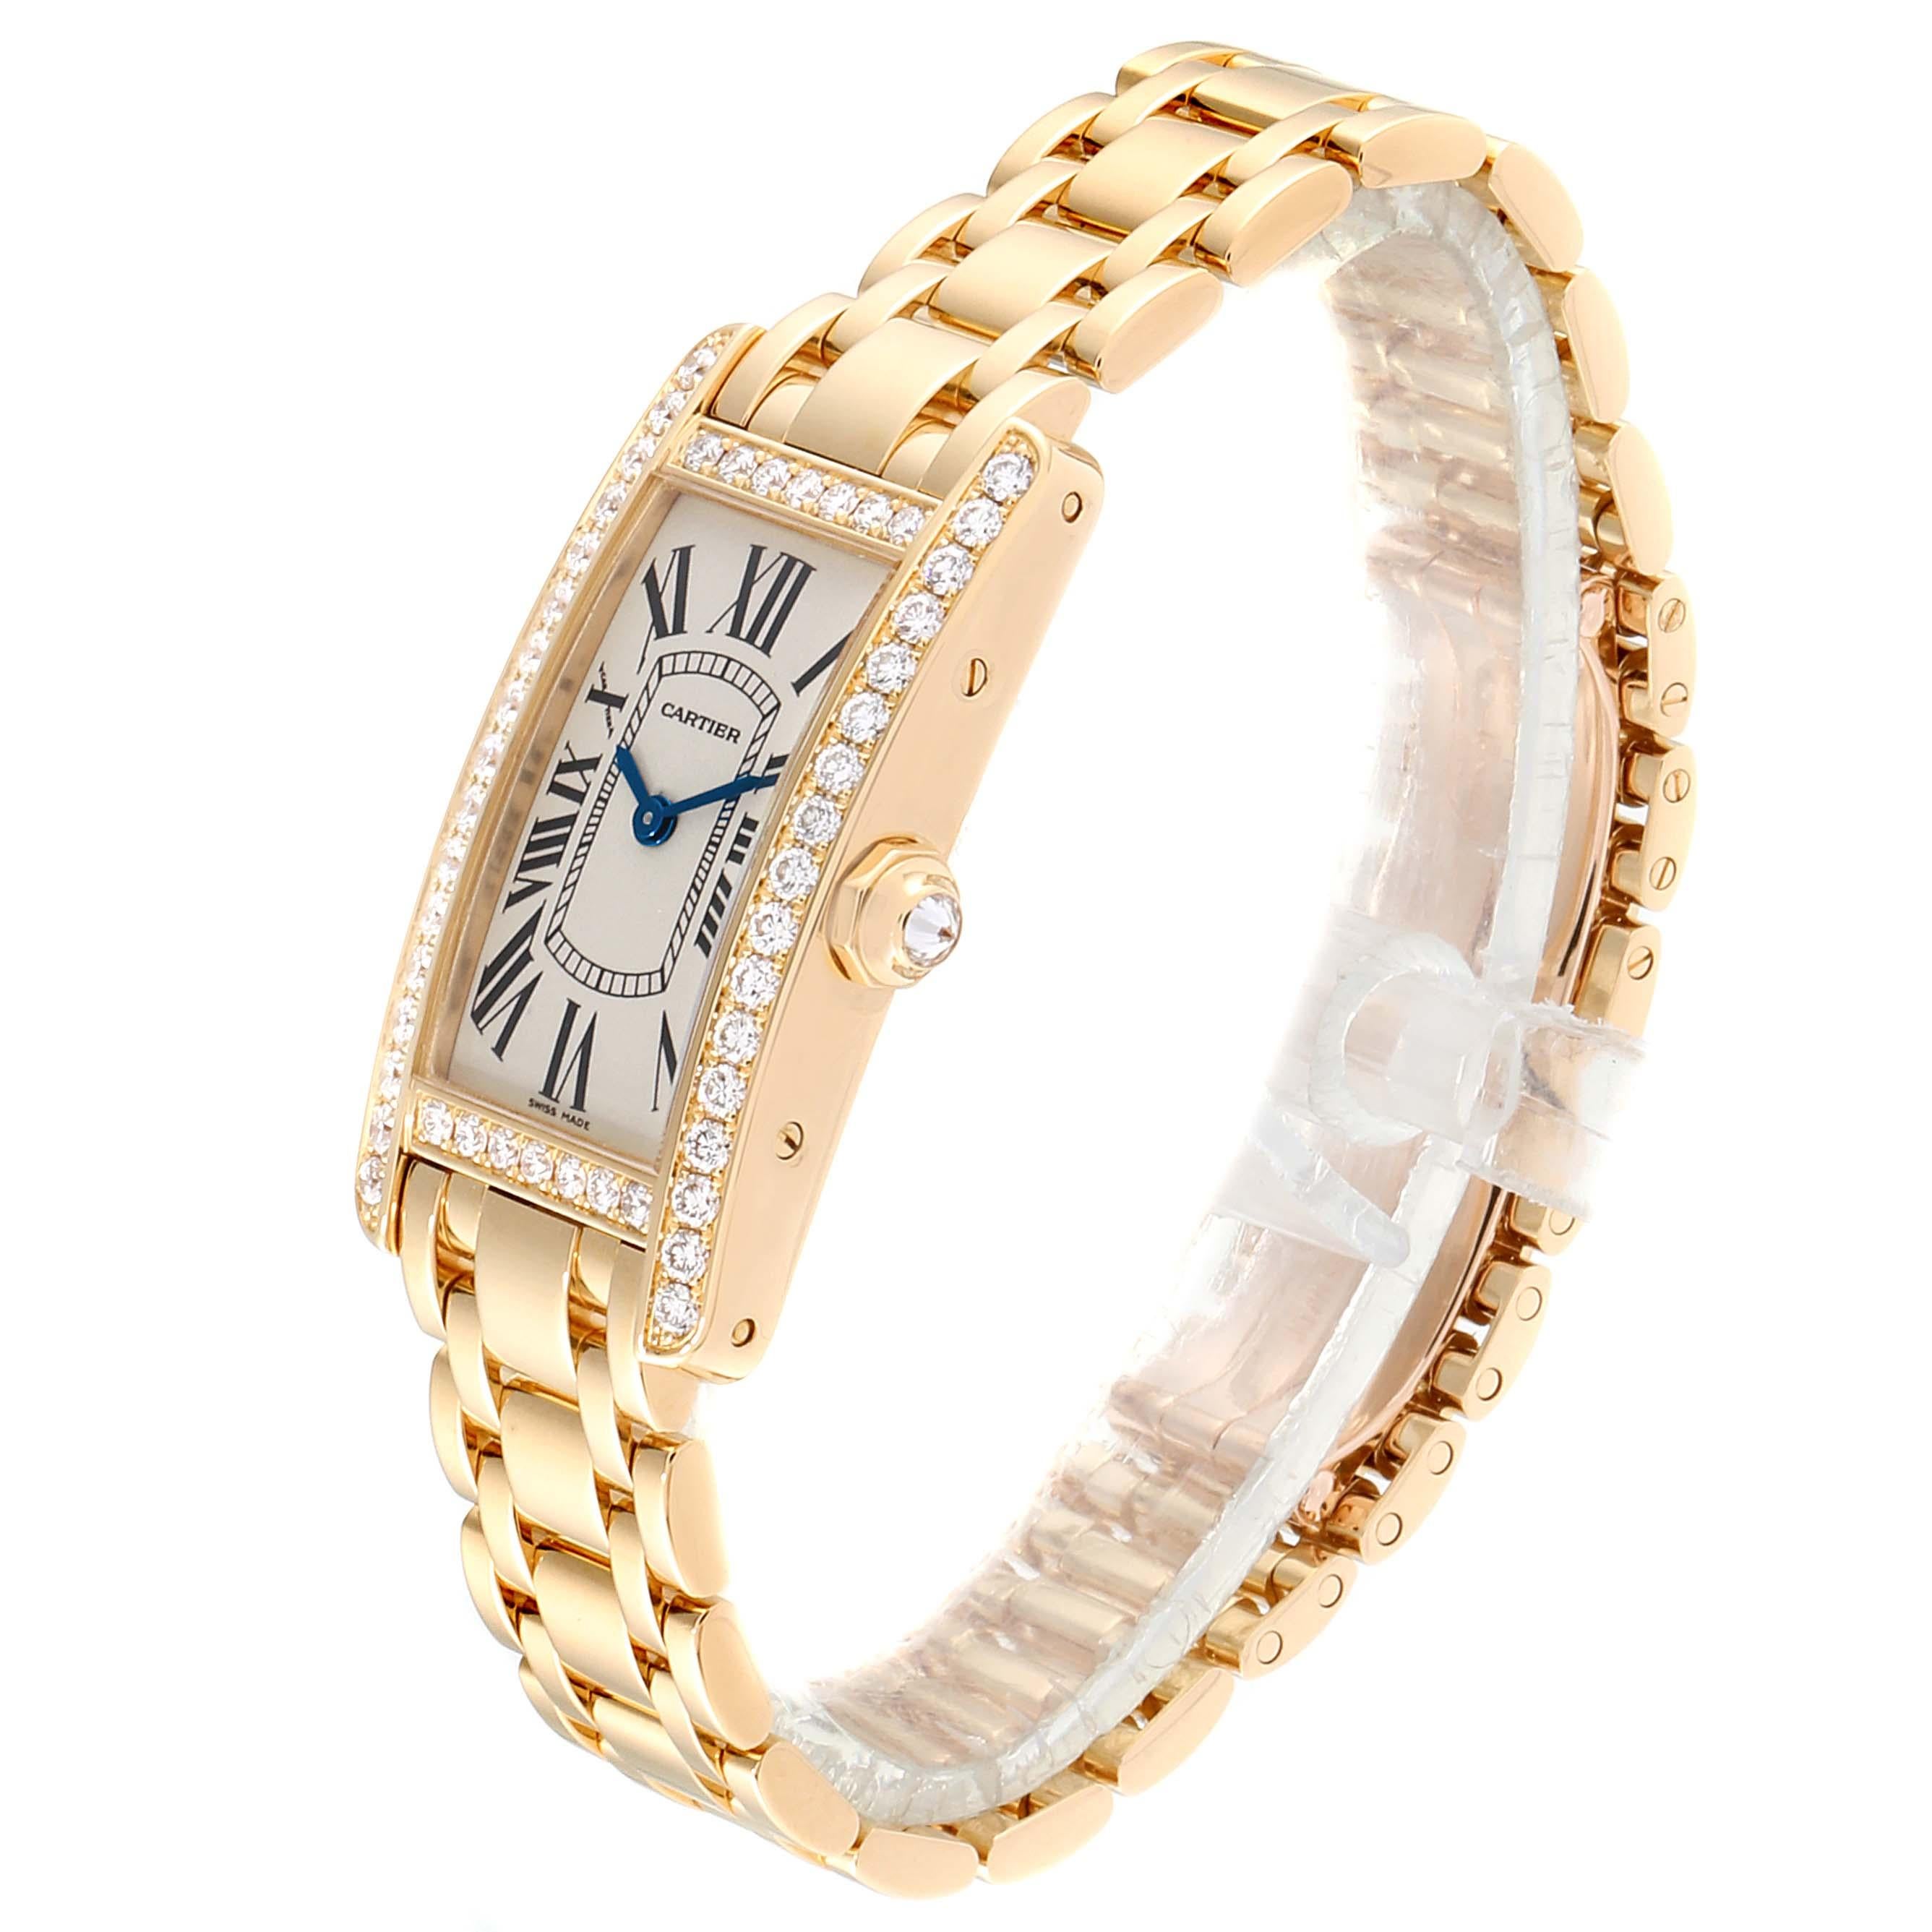 Cartier Tank Americaine Yellow Gold Diamond Ladies Watch WB7072K2 Box Papers In Excellent Condition For Sale In Atlanta, GA